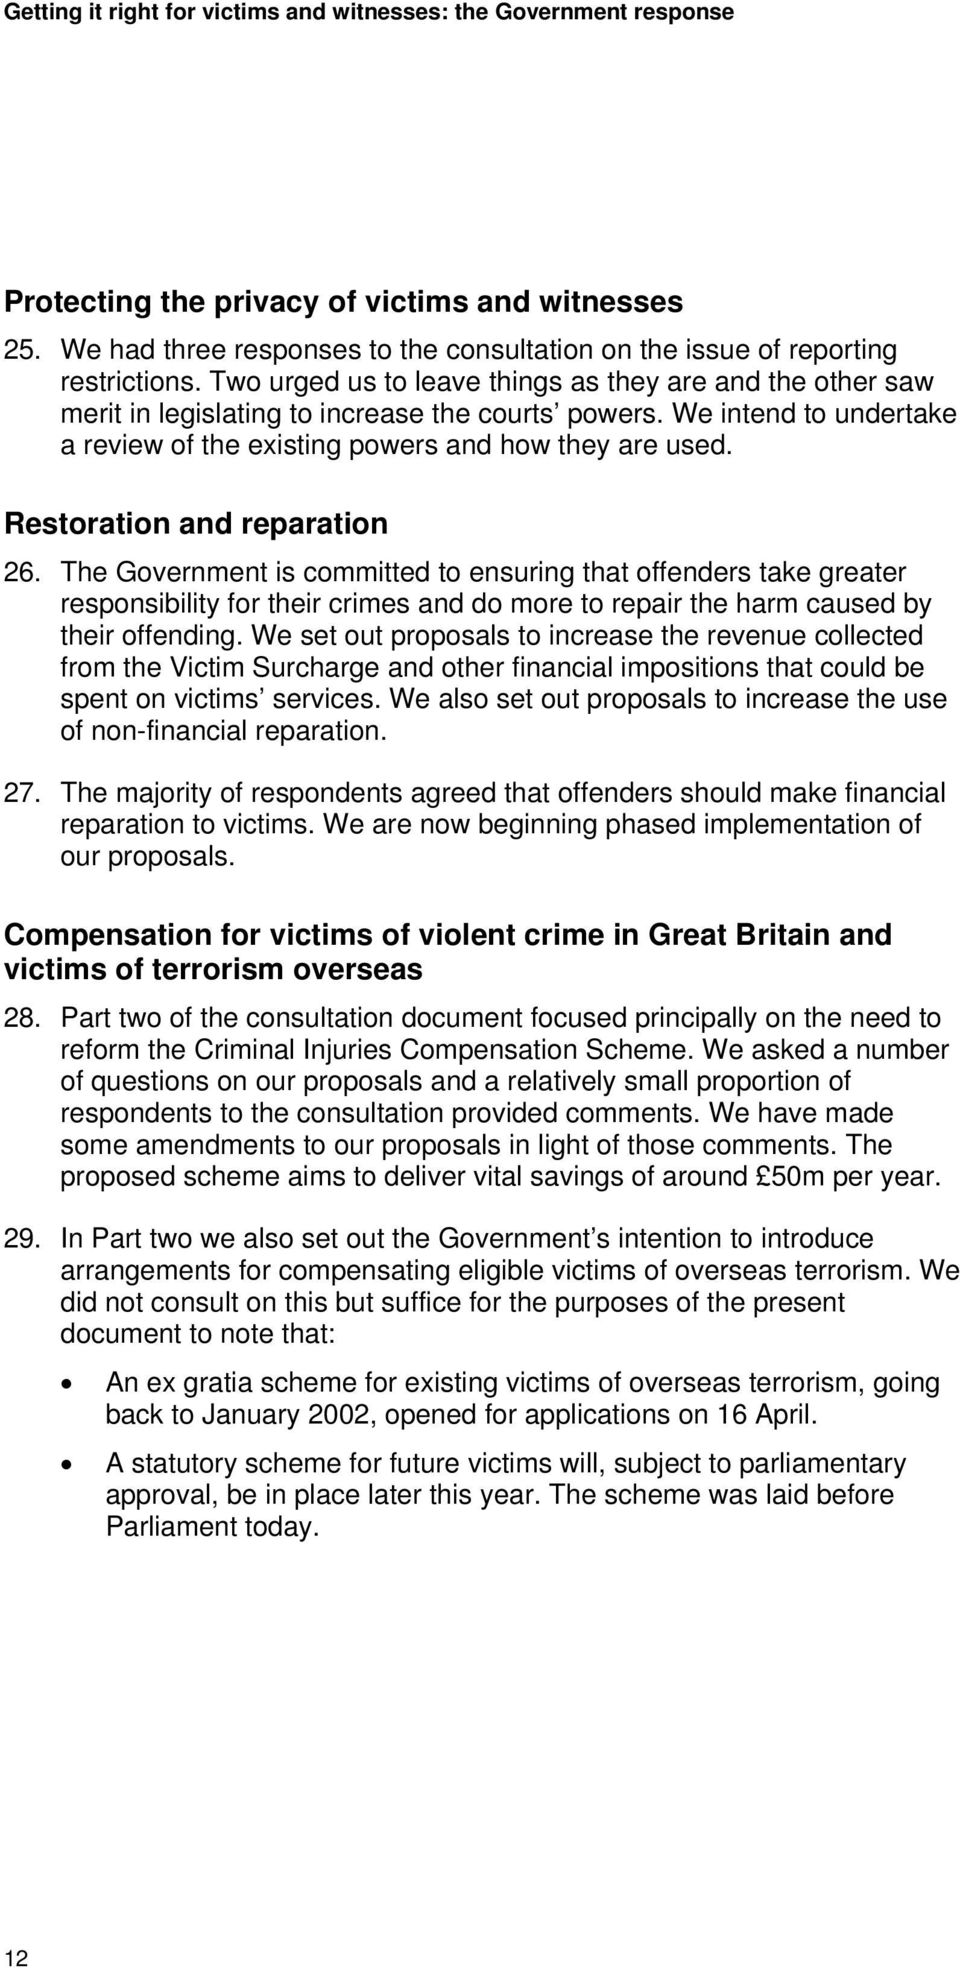 Restoration and reparation 26. The Government is committed to ensuring that offenders take greater responsibility for their crimes and do more to repair the harm caused by their offending.